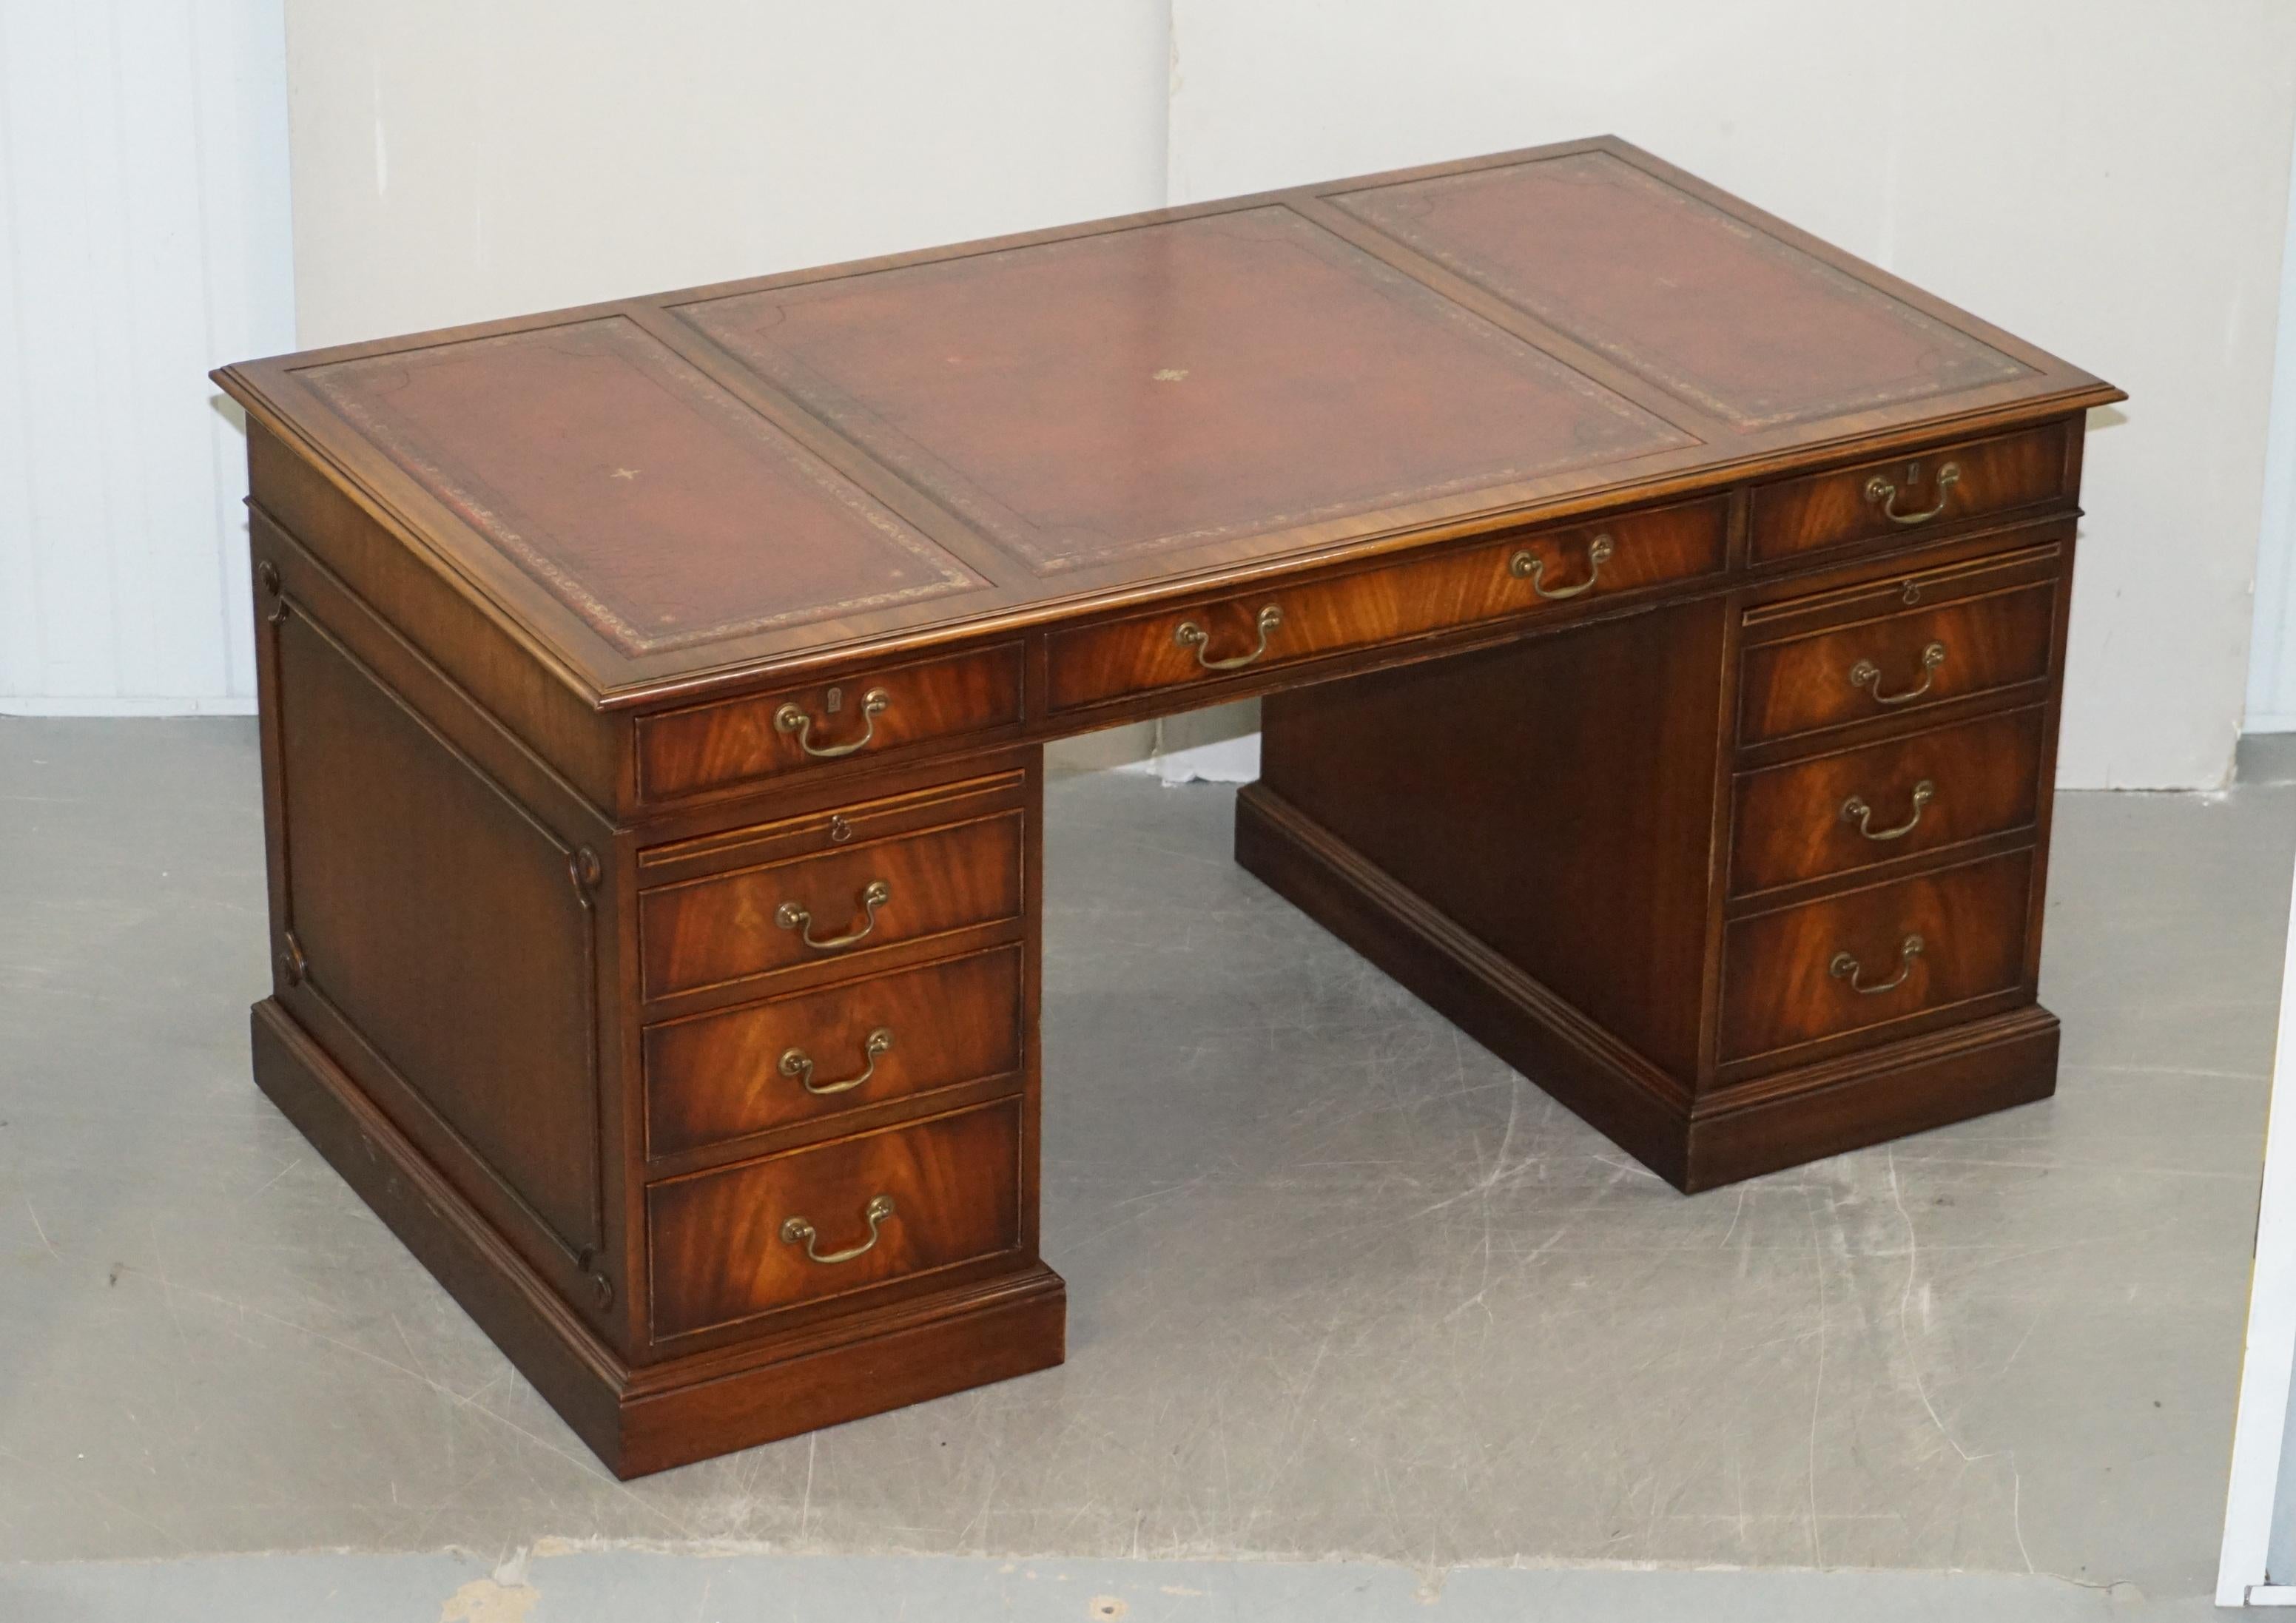 We are delighted to offer this exquisite vintage hand made mahogany twin pedestal partner desk with oxblood leather top and double butlers serving trays

A beautiful, desirable and a very unique piece, the desk is made with a lovely grain of